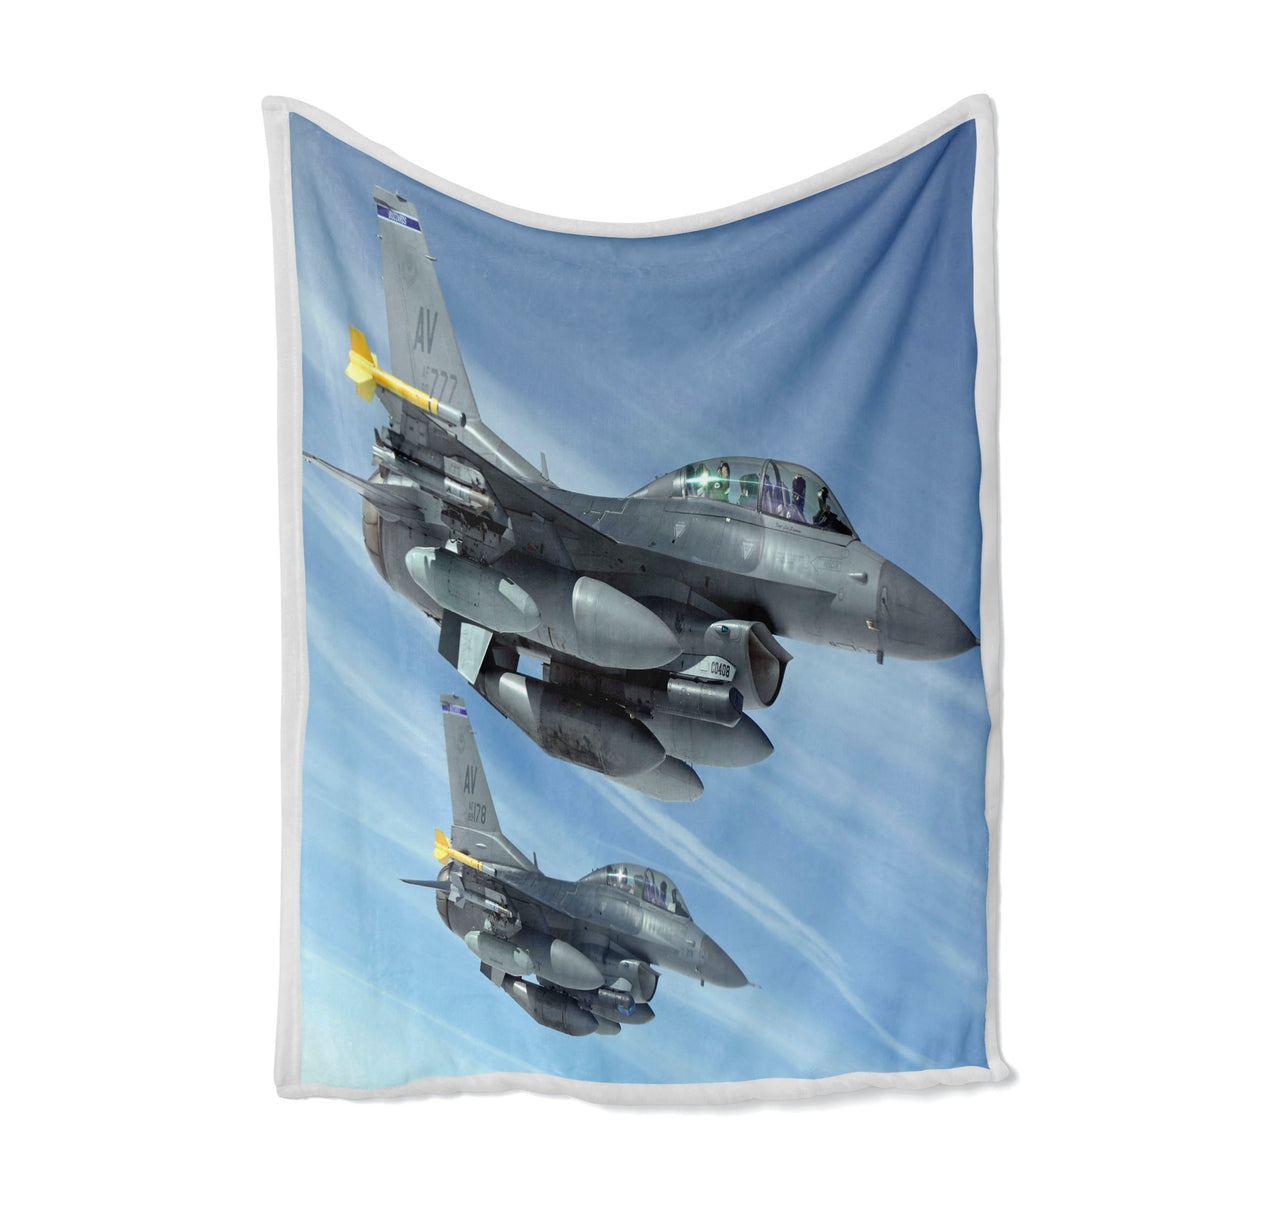 Two Fighting Falcon Designed Bed Blankets & Covers